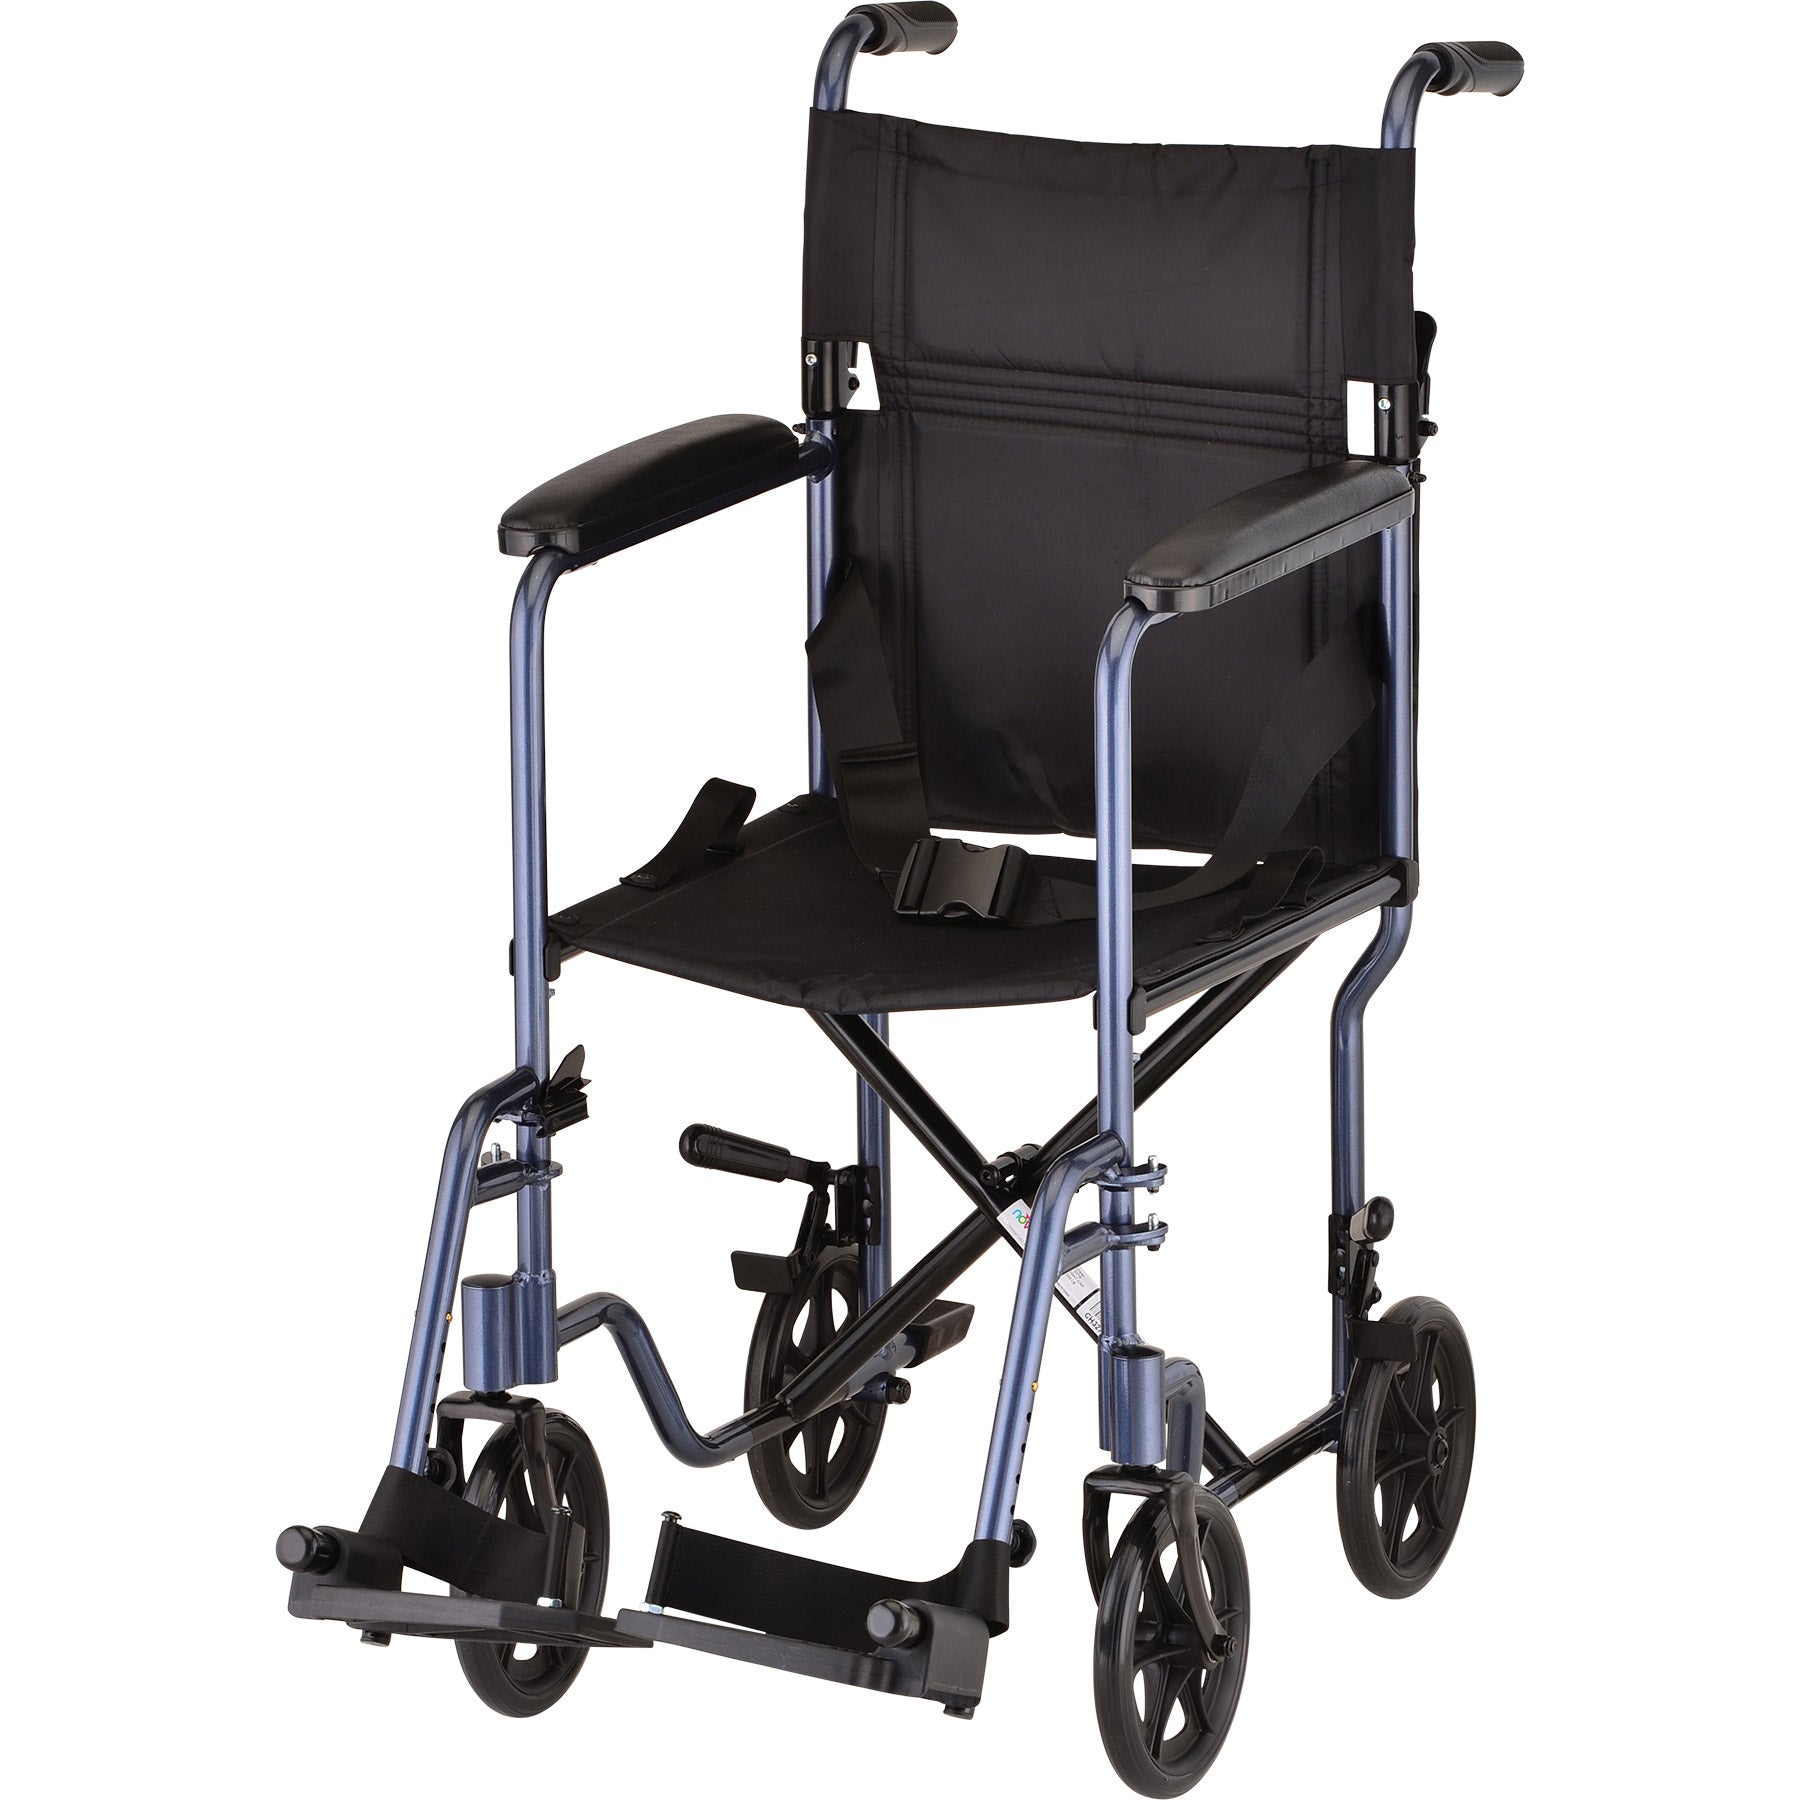 17" Lightweight Transport Chair with Full Arms